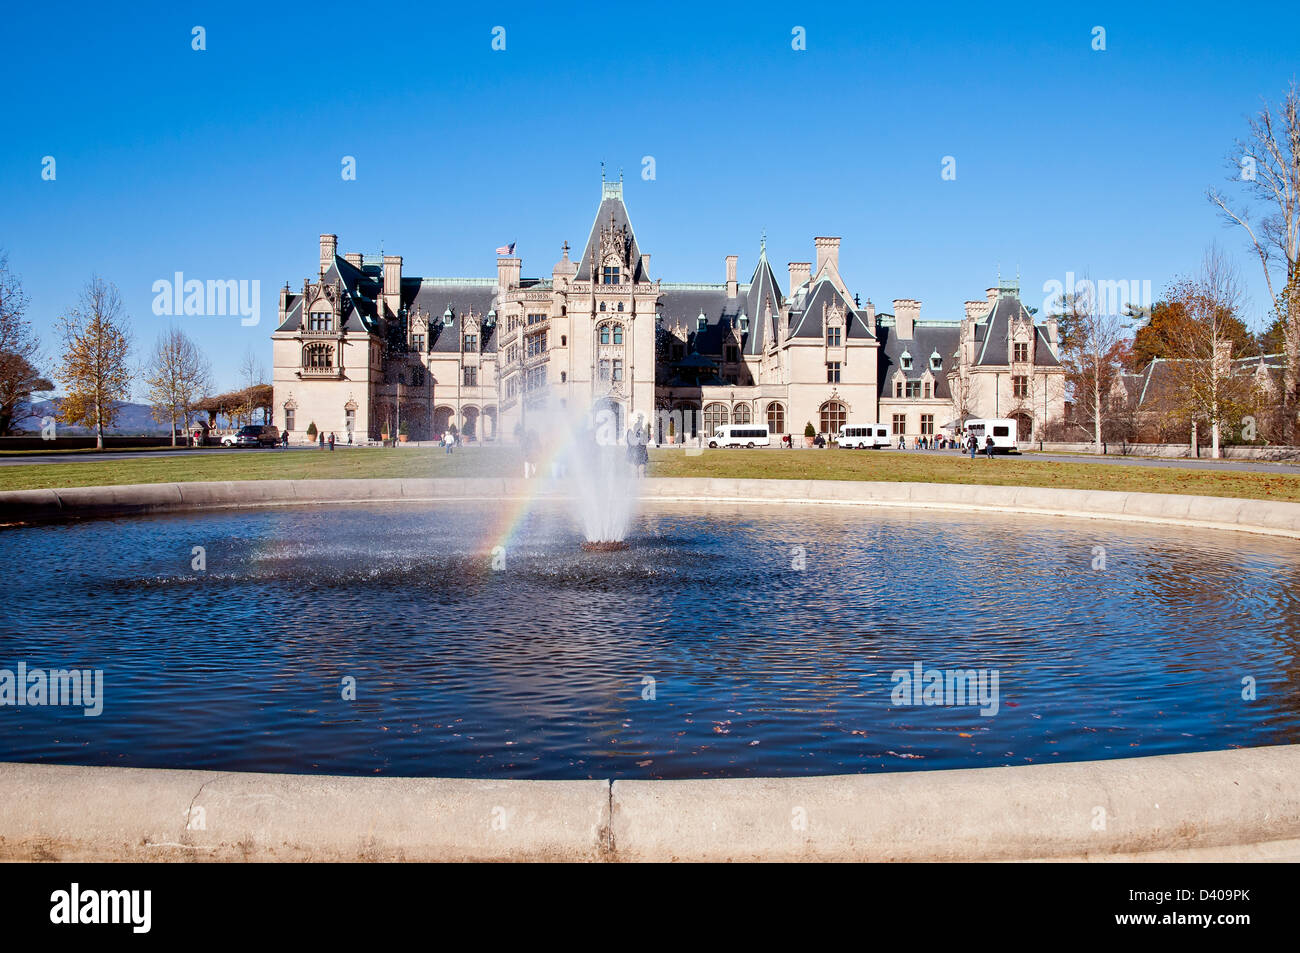 Panorama of Biltmore House with fountain in front, Asheville, North Carolina, ,North America ,USA Stock Photo